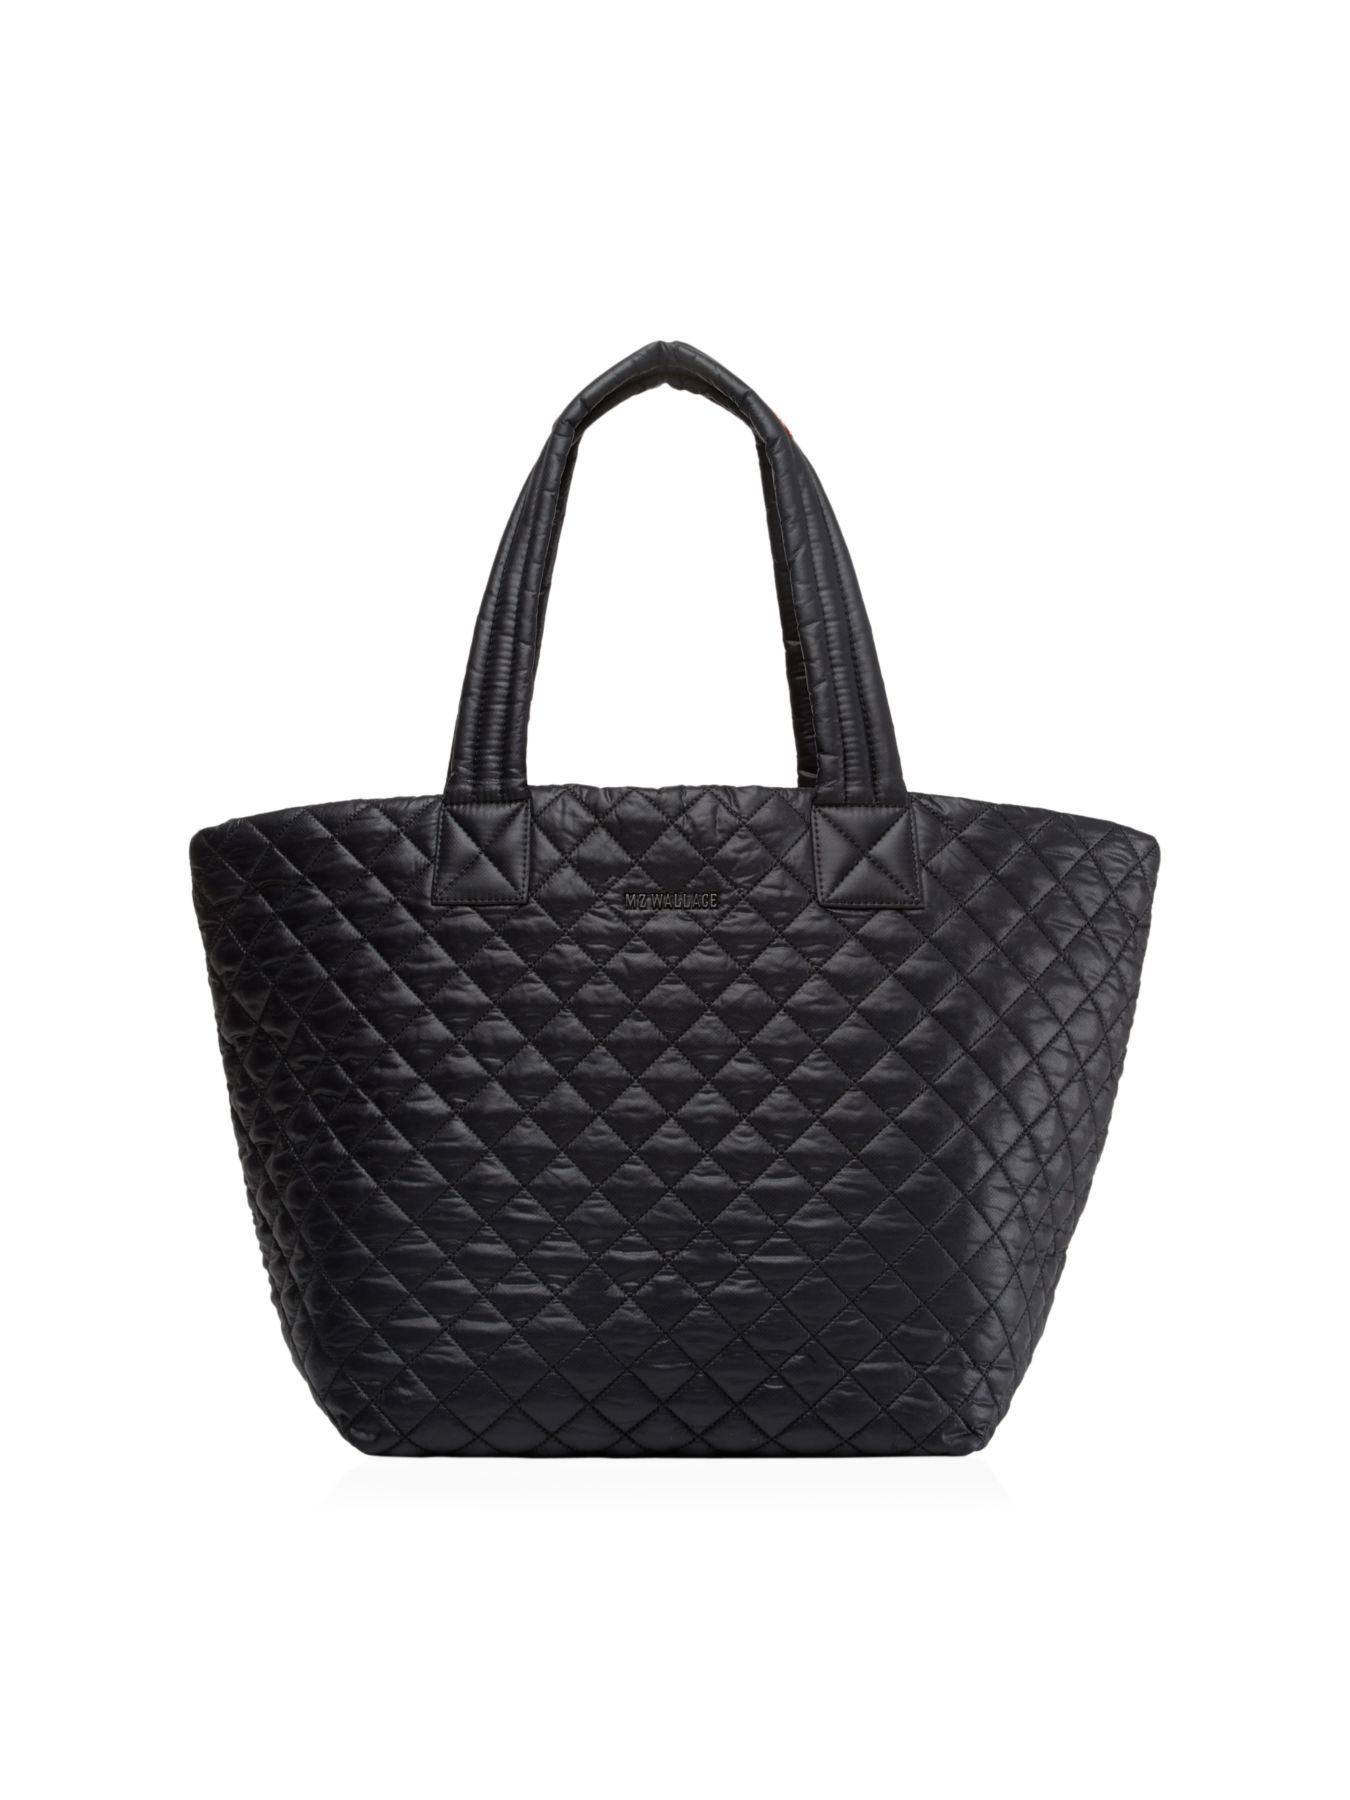 MZ Wallace Medium Metro Tote Deluxe in Black - Save 18% - Lyst